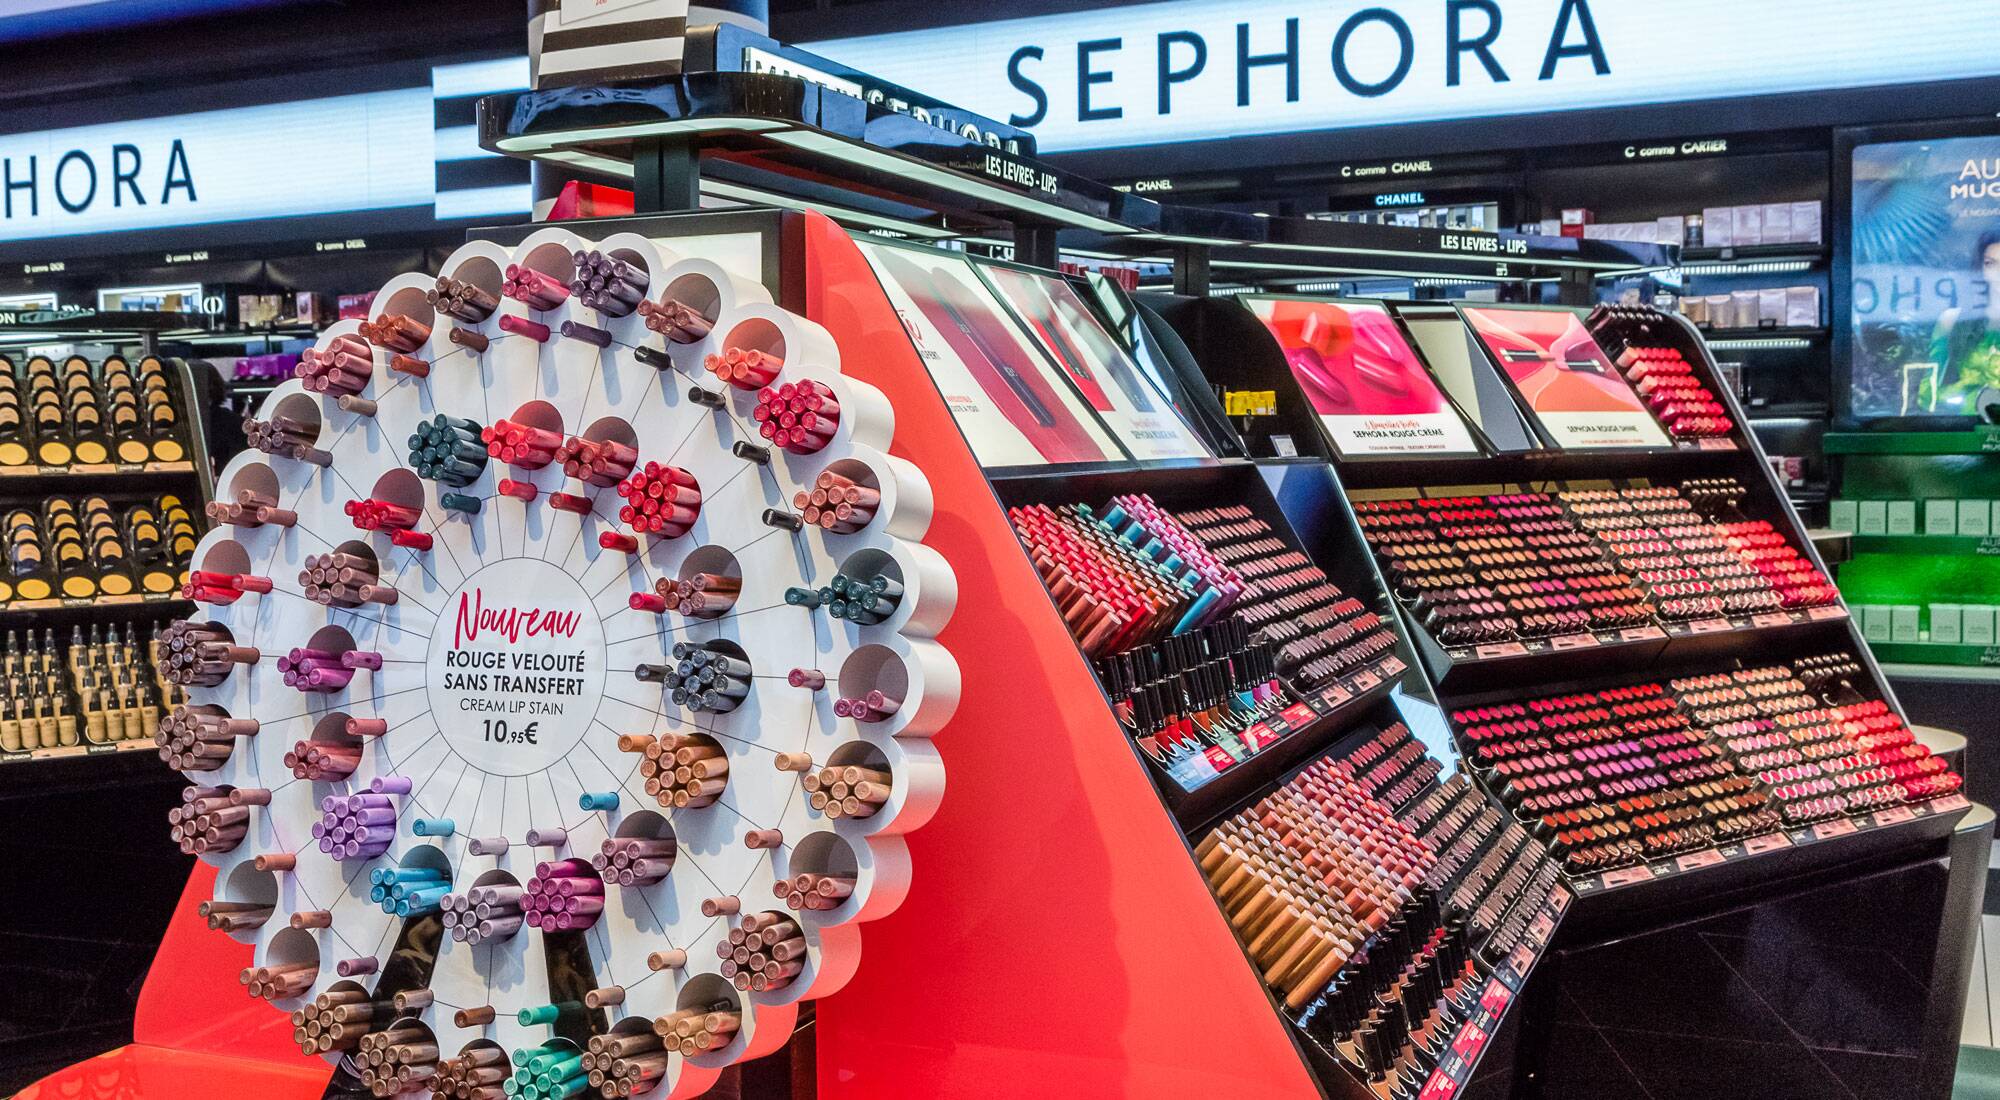 LVMH-owned Sephora may dump Genesis Colors, in talks with DLF Brands for  new franchise partner in India - The Economic Times